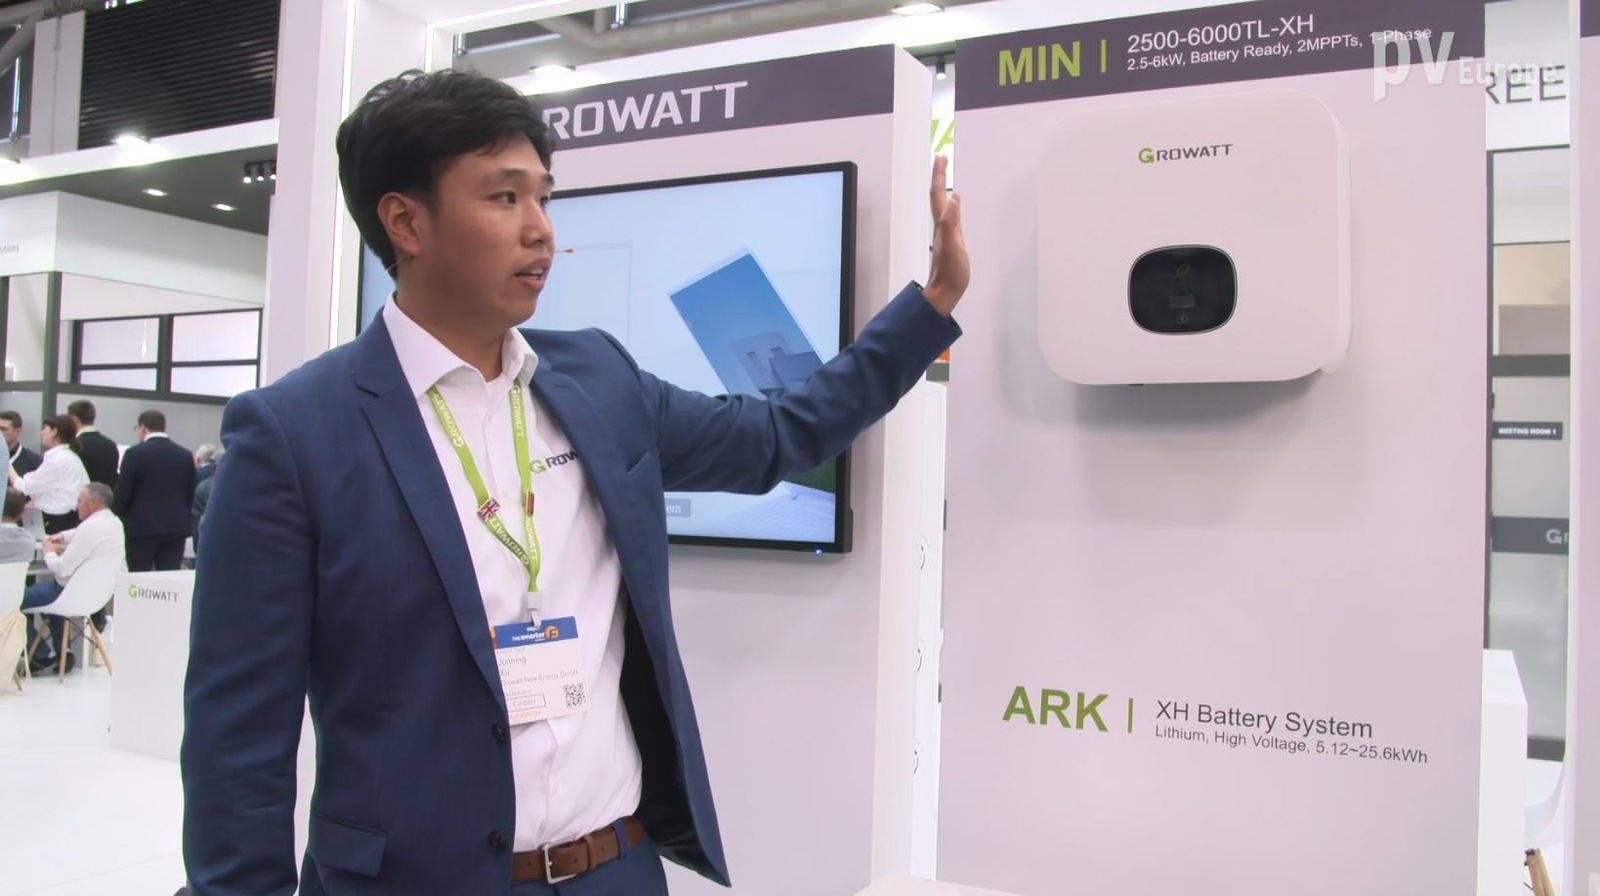 Junning Xu of Growatt: New solutions for storage, EV charging and commercial solar